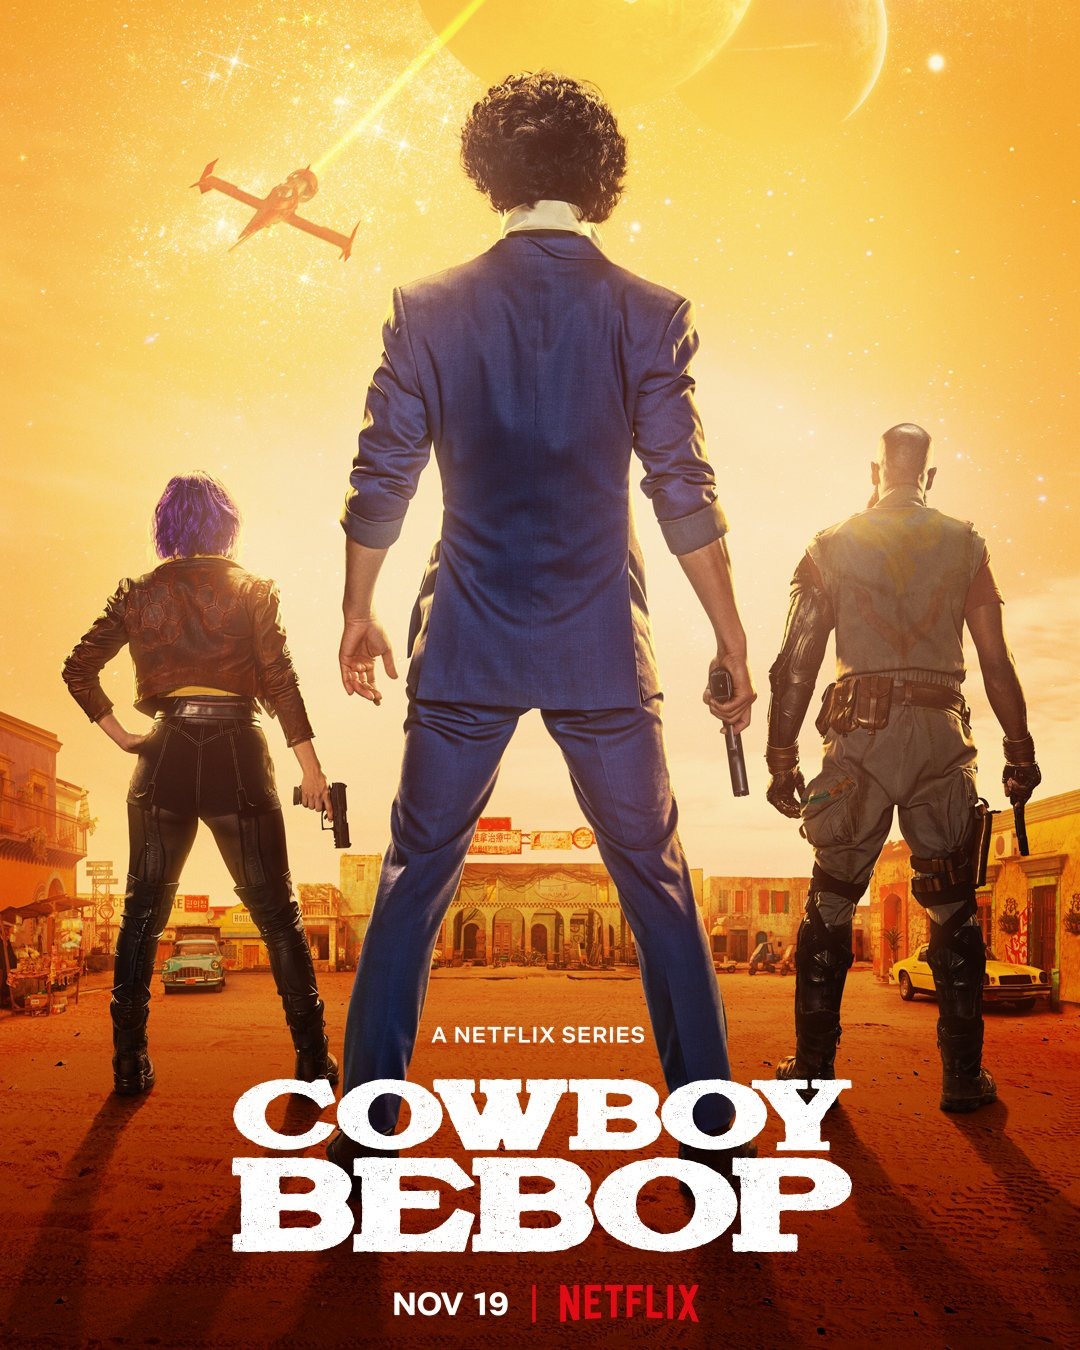 a promotional poster for Netflix's Cowboy Bebop (2021). Three figures stand facing away from the camera towards a yellow-orange glow